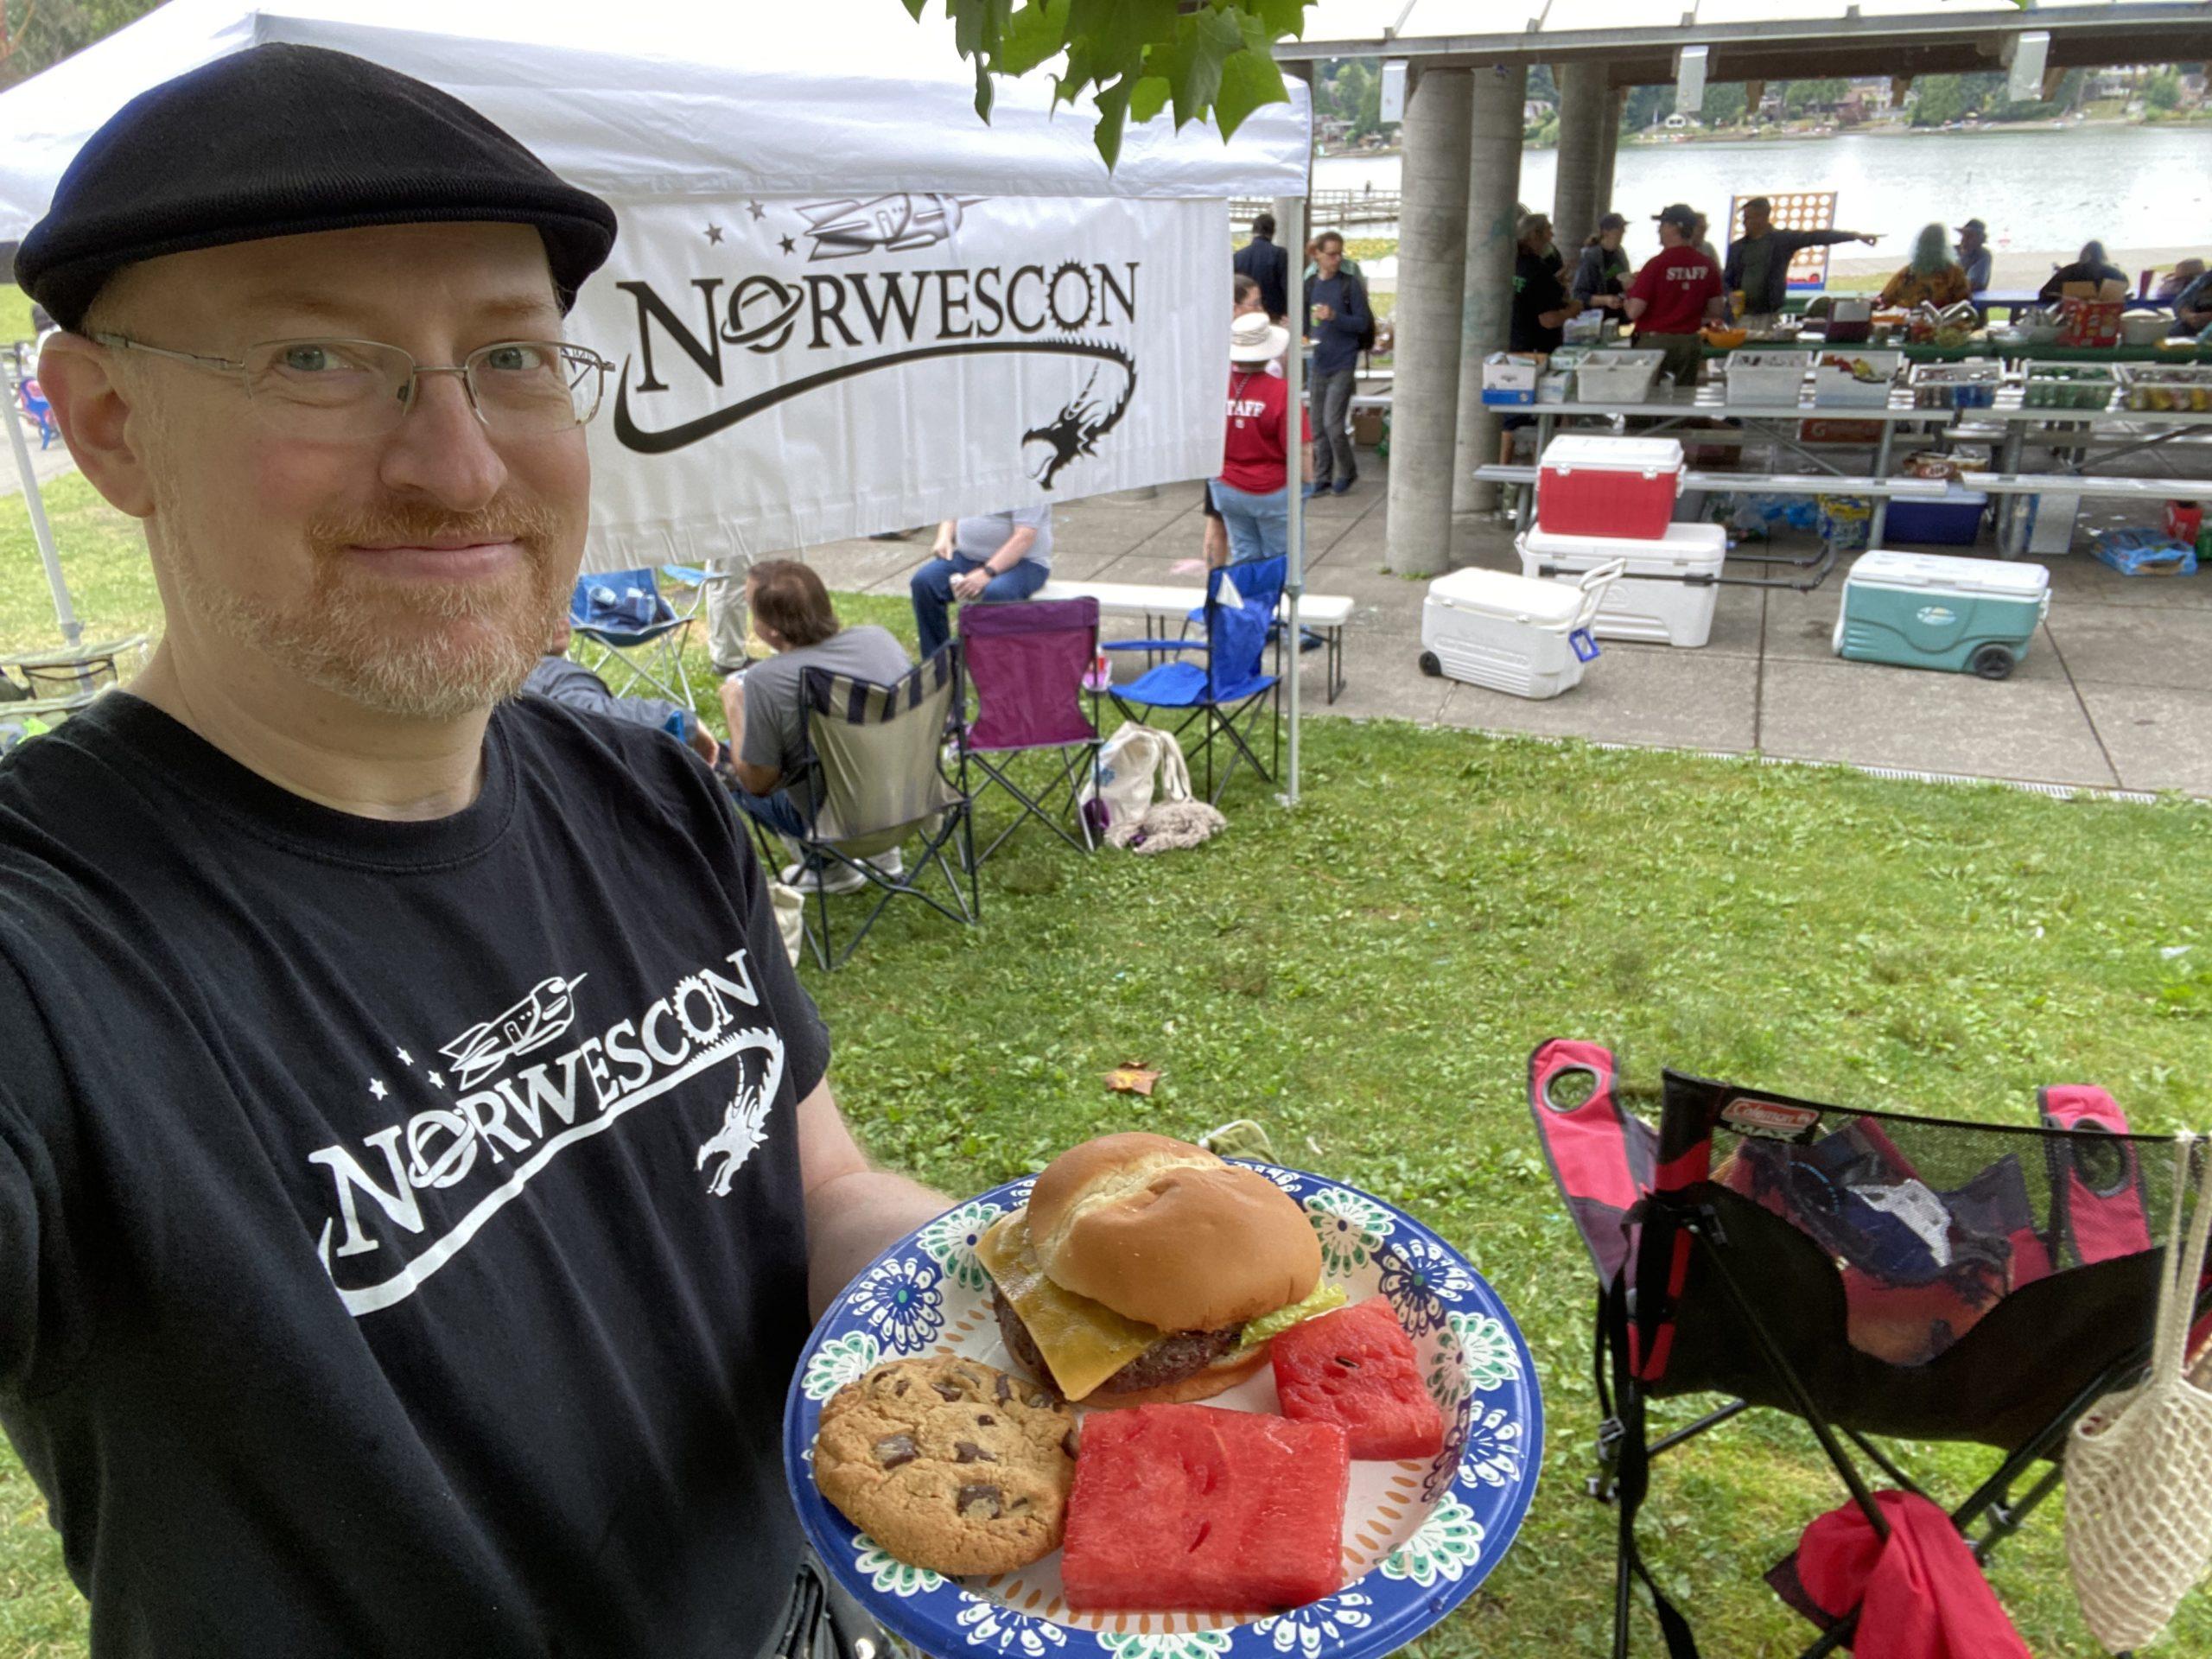 Me standing in a park near a picnic shelter with people and supplies at the tables. Behind me is a pop-up canopy with a Norwescon logo banner hanging from it. I'm wearing a Norwescon shirt, and holding a plate of food.